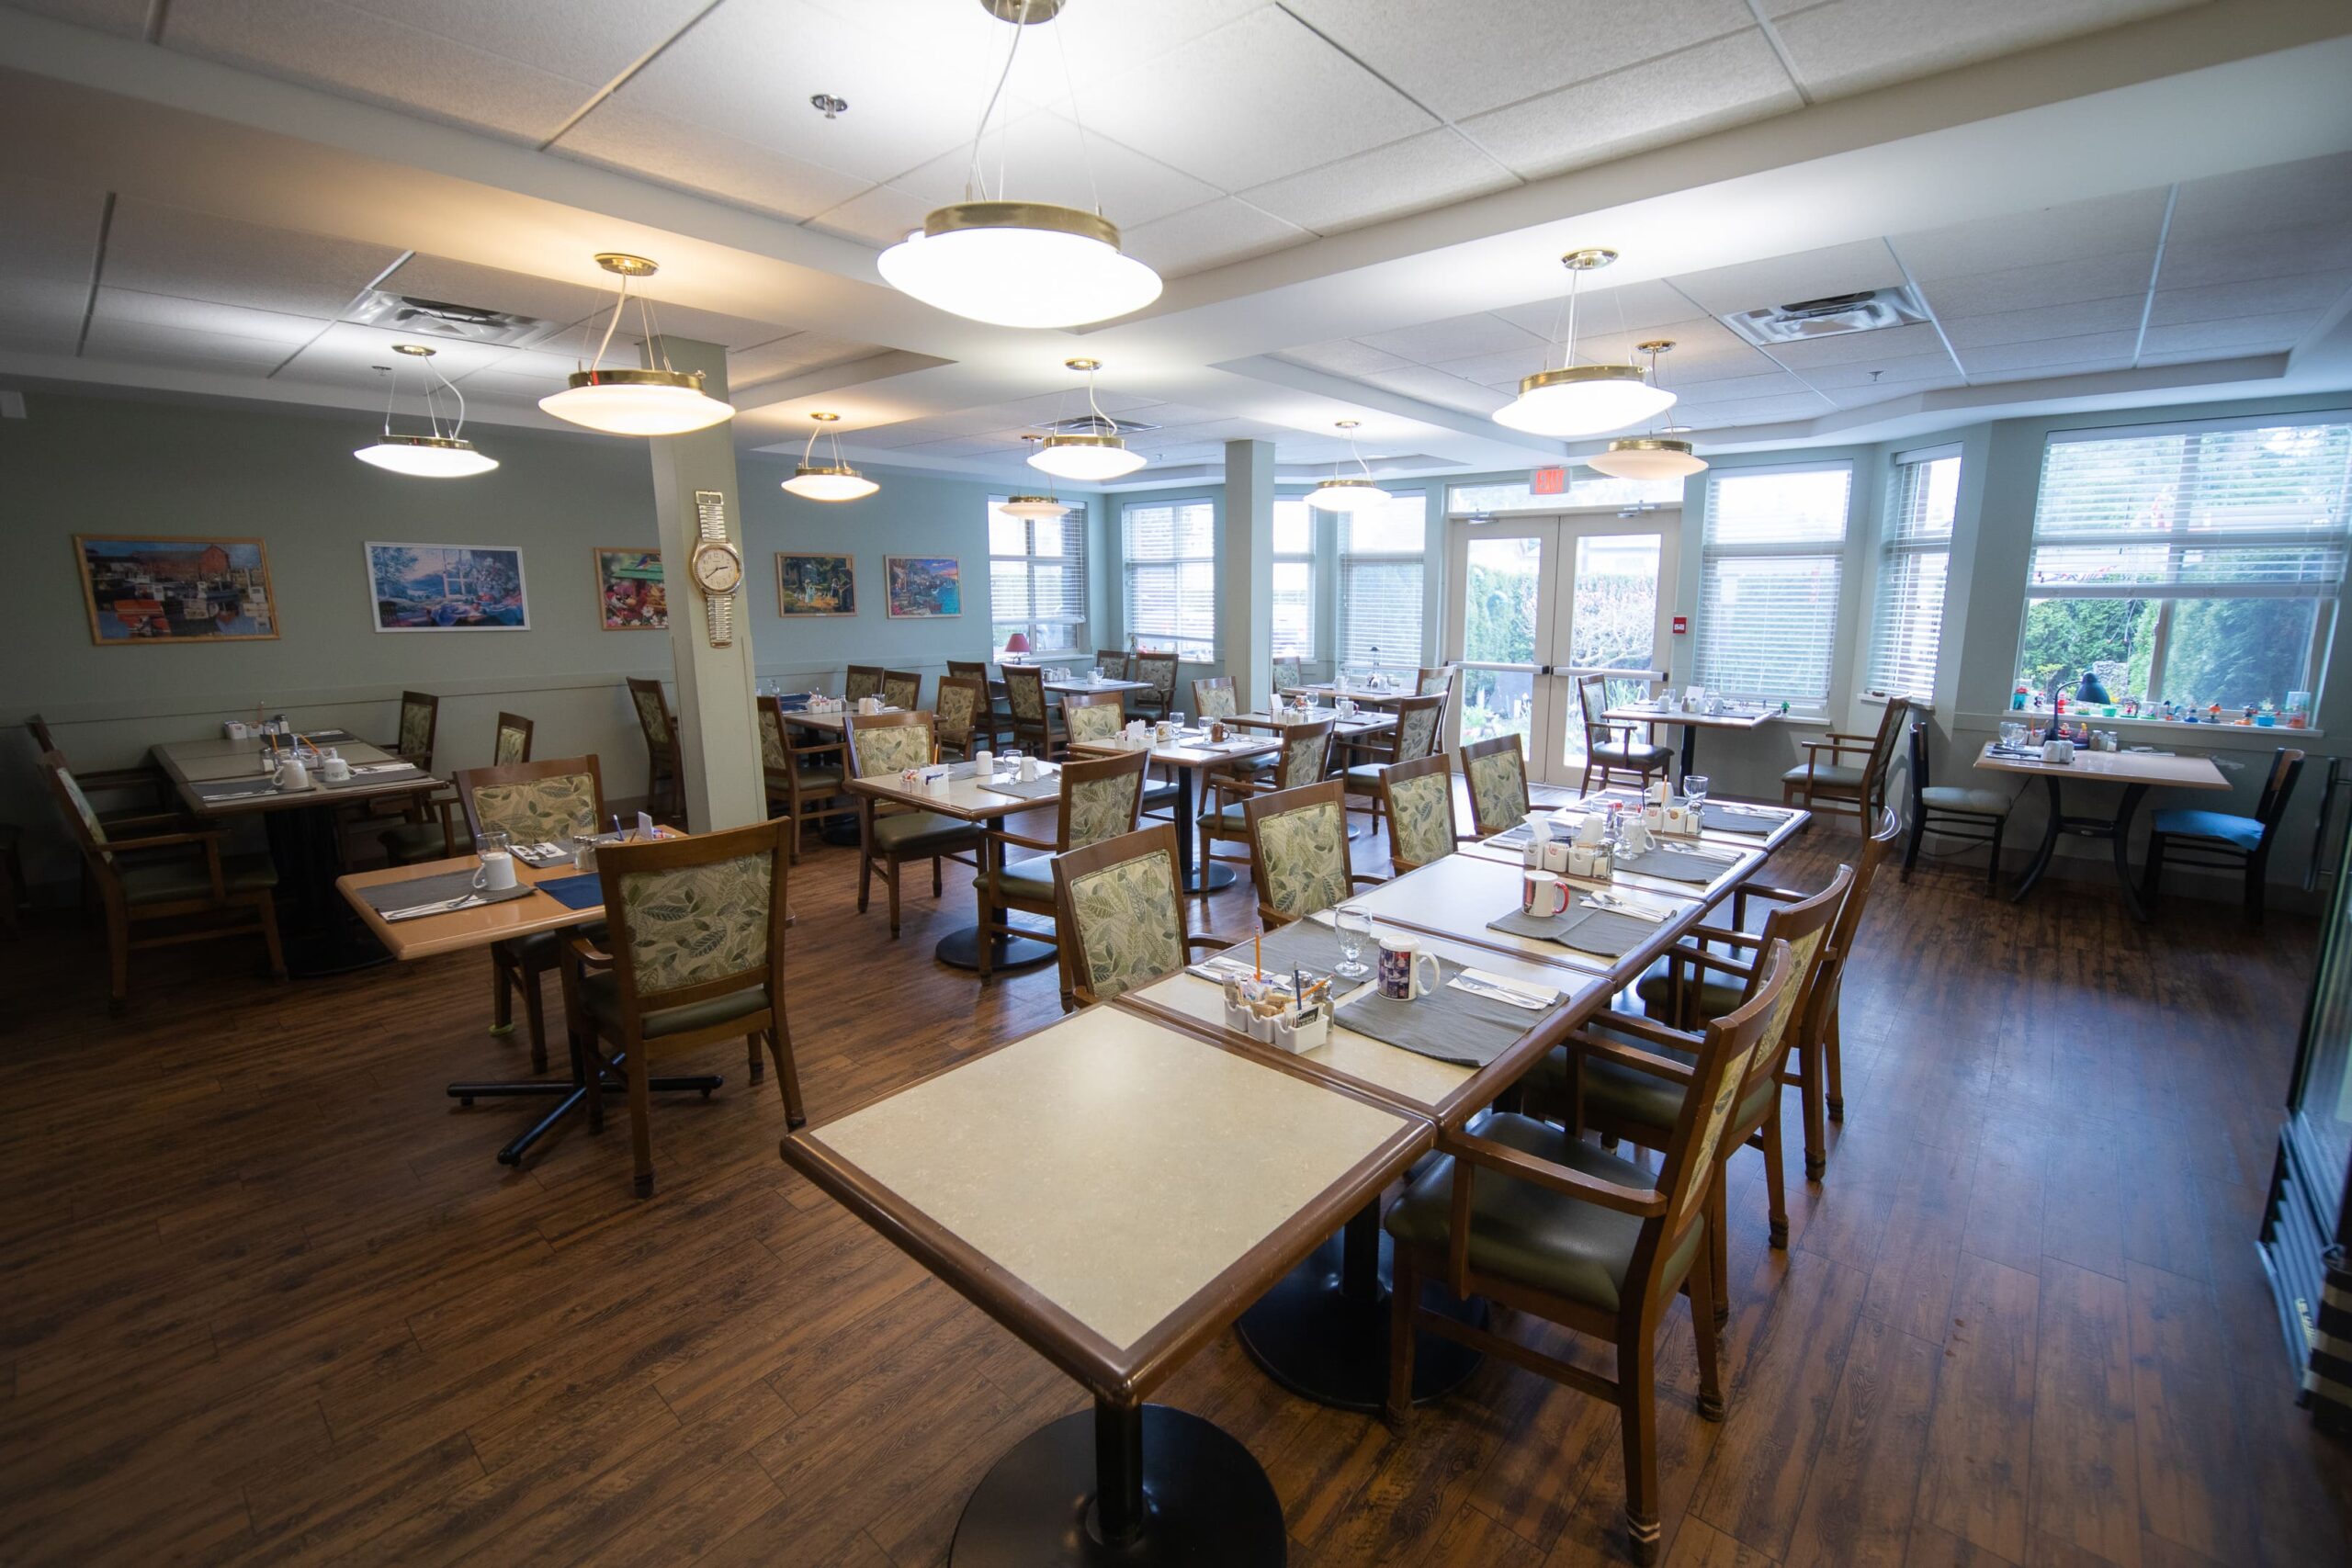 Communal dining area at the Earl Haig Retirement Residence